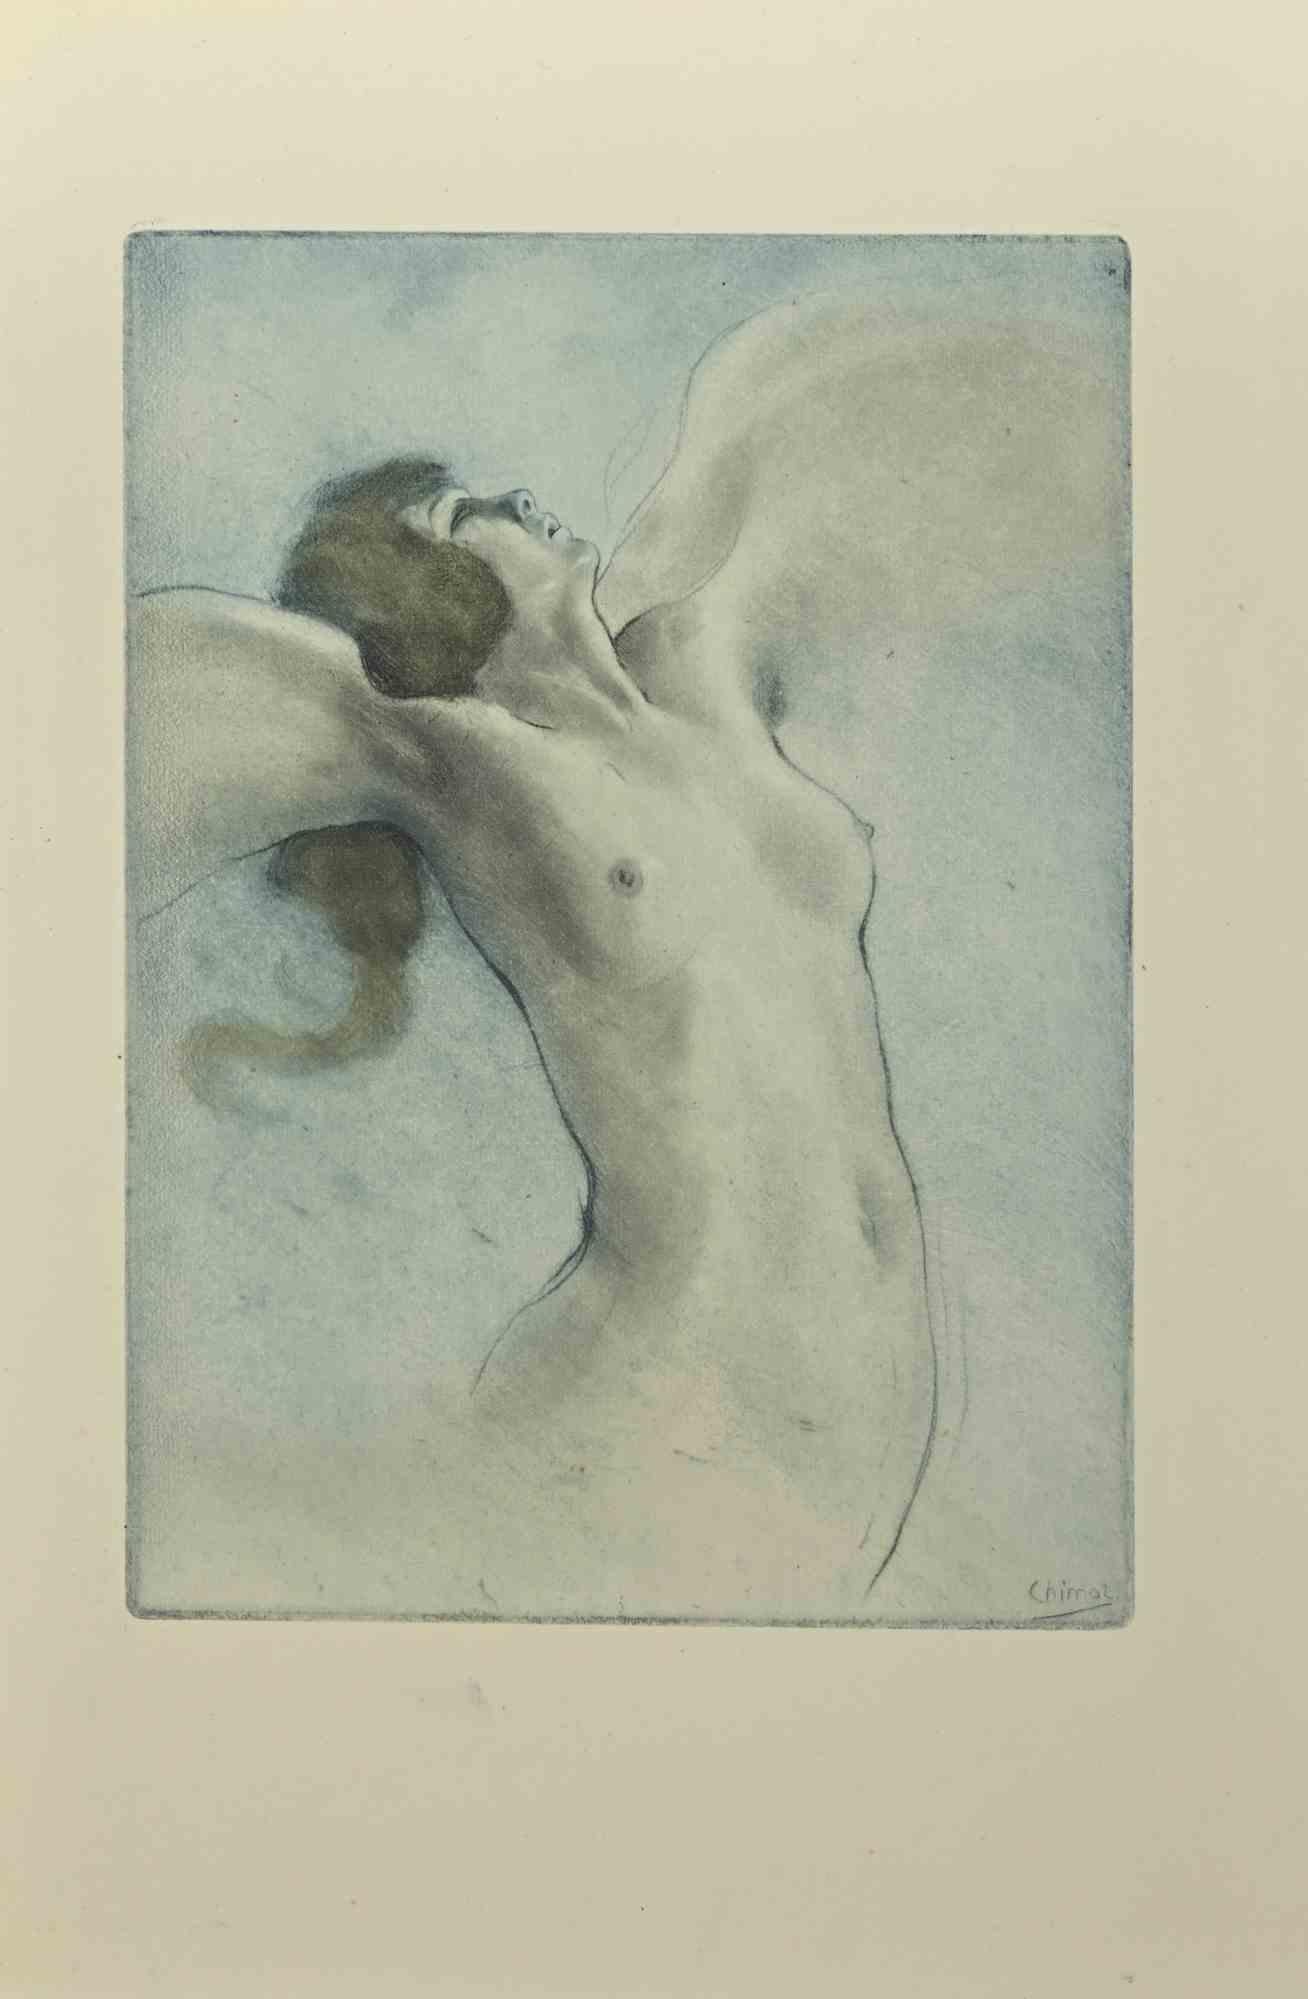 Nude with Wings is an etching realized by Edouard Chimot in the 1930s.

Signed on the plate by the artist on the lower right corner.

Good conditions.

Édouard Chimot (26 November 1880 – 7 June 1959) was a French artist, illustrator, and editor